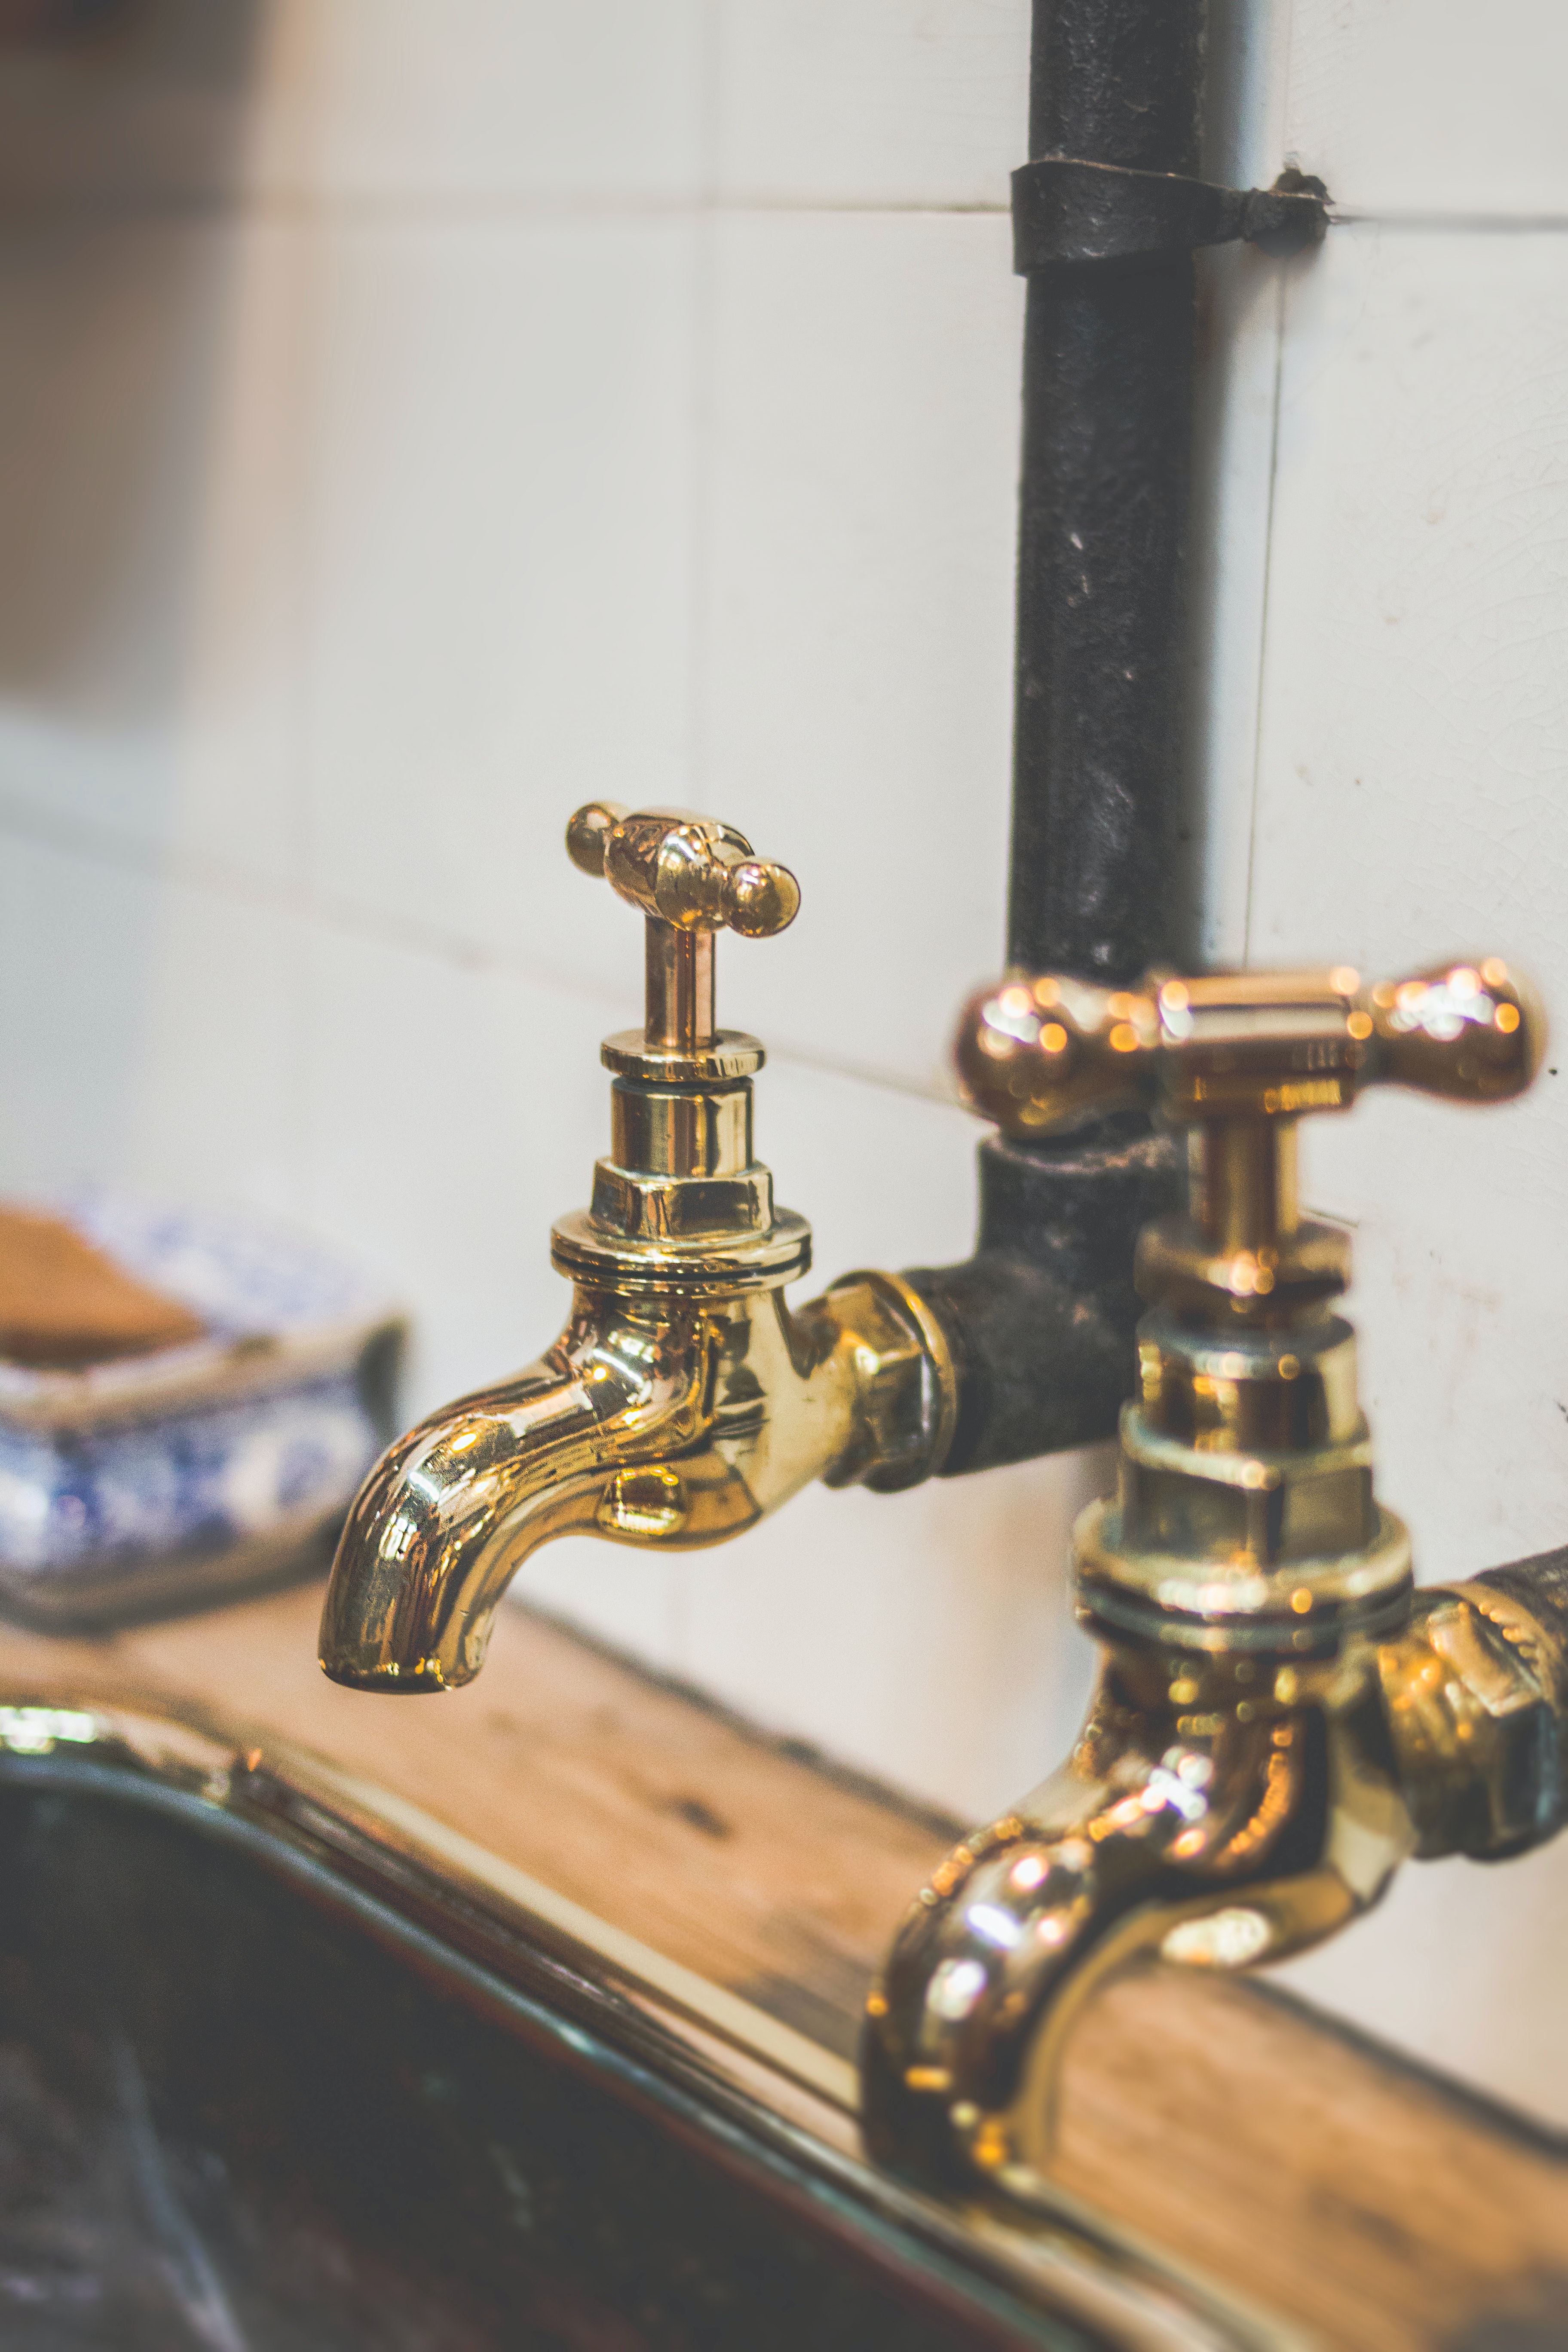 Plumbing Inspection for Your Home in Las Vegas